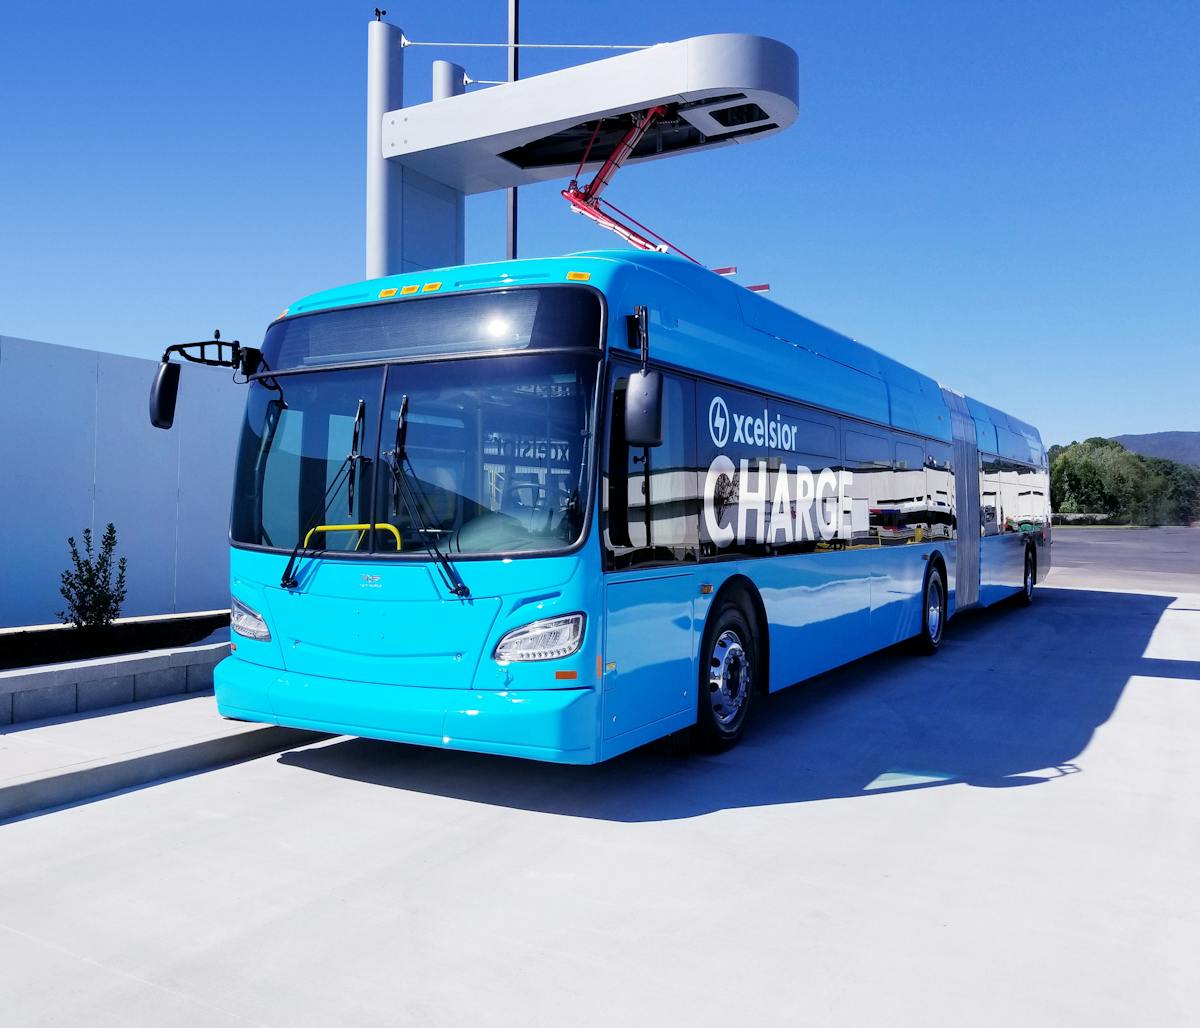 New Flyer&apos;s VIC is dedicated to advancing bus and coach technology in North America to serve the Smart Cities of the future.